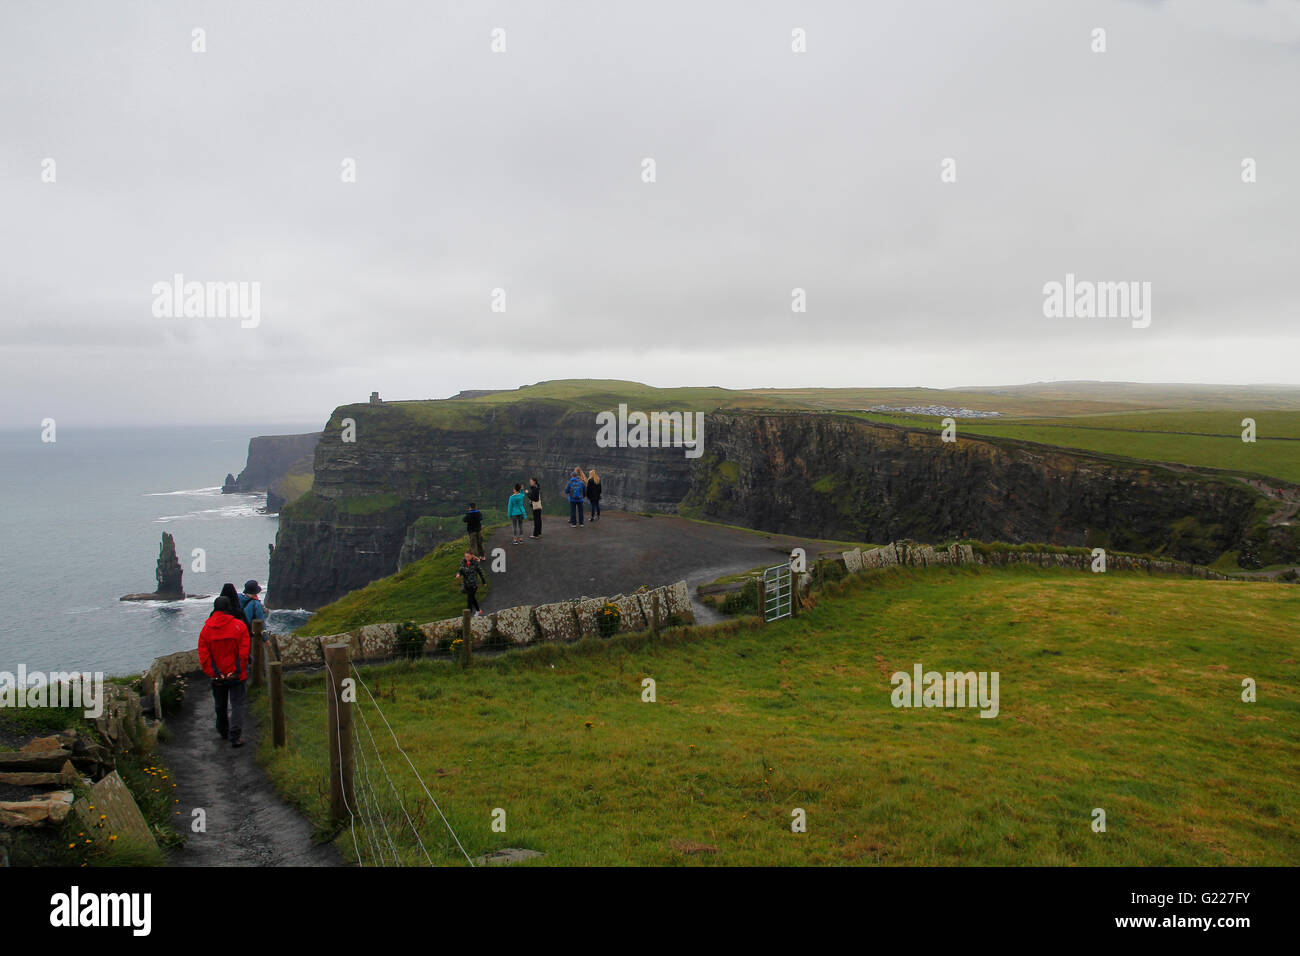 People walking in Cliffs of moher in Clare co., Ireland Stock Photo